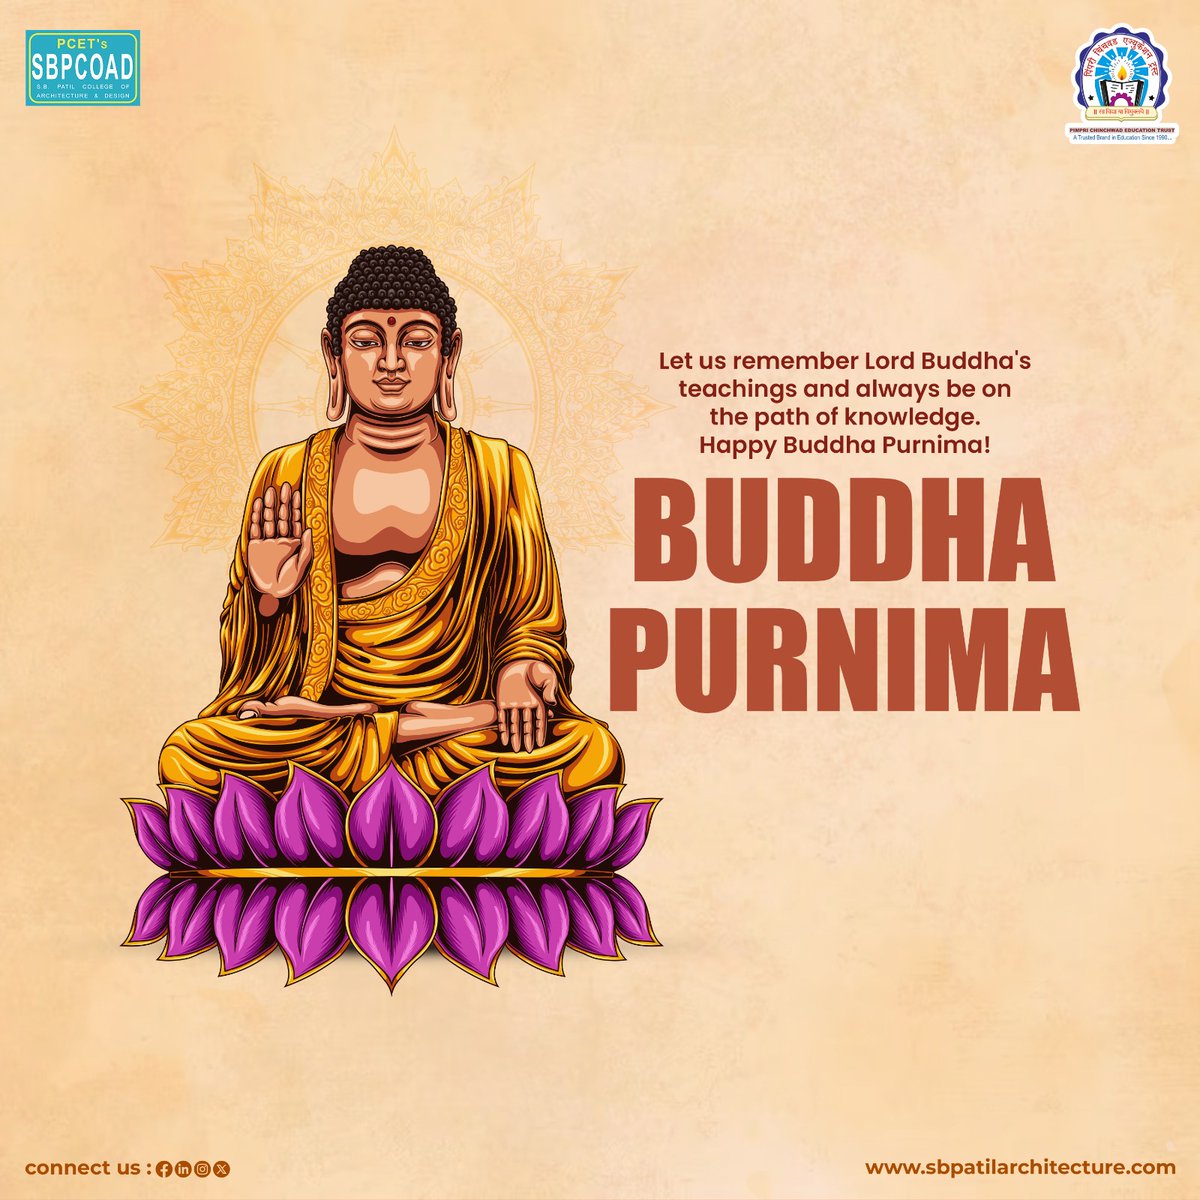 Wishing everyone a blessed Buddha Purnima! Let's take inspiration from Lord Buddha's teachings of compassion, peace, and enlightenment. May this auspicious day illuminate our lives with wisdom and inner harmony. #PCET #SBPCOAD #BuddhaPurnima #BuddhaJayanti #Vesak #GautamaBuddha